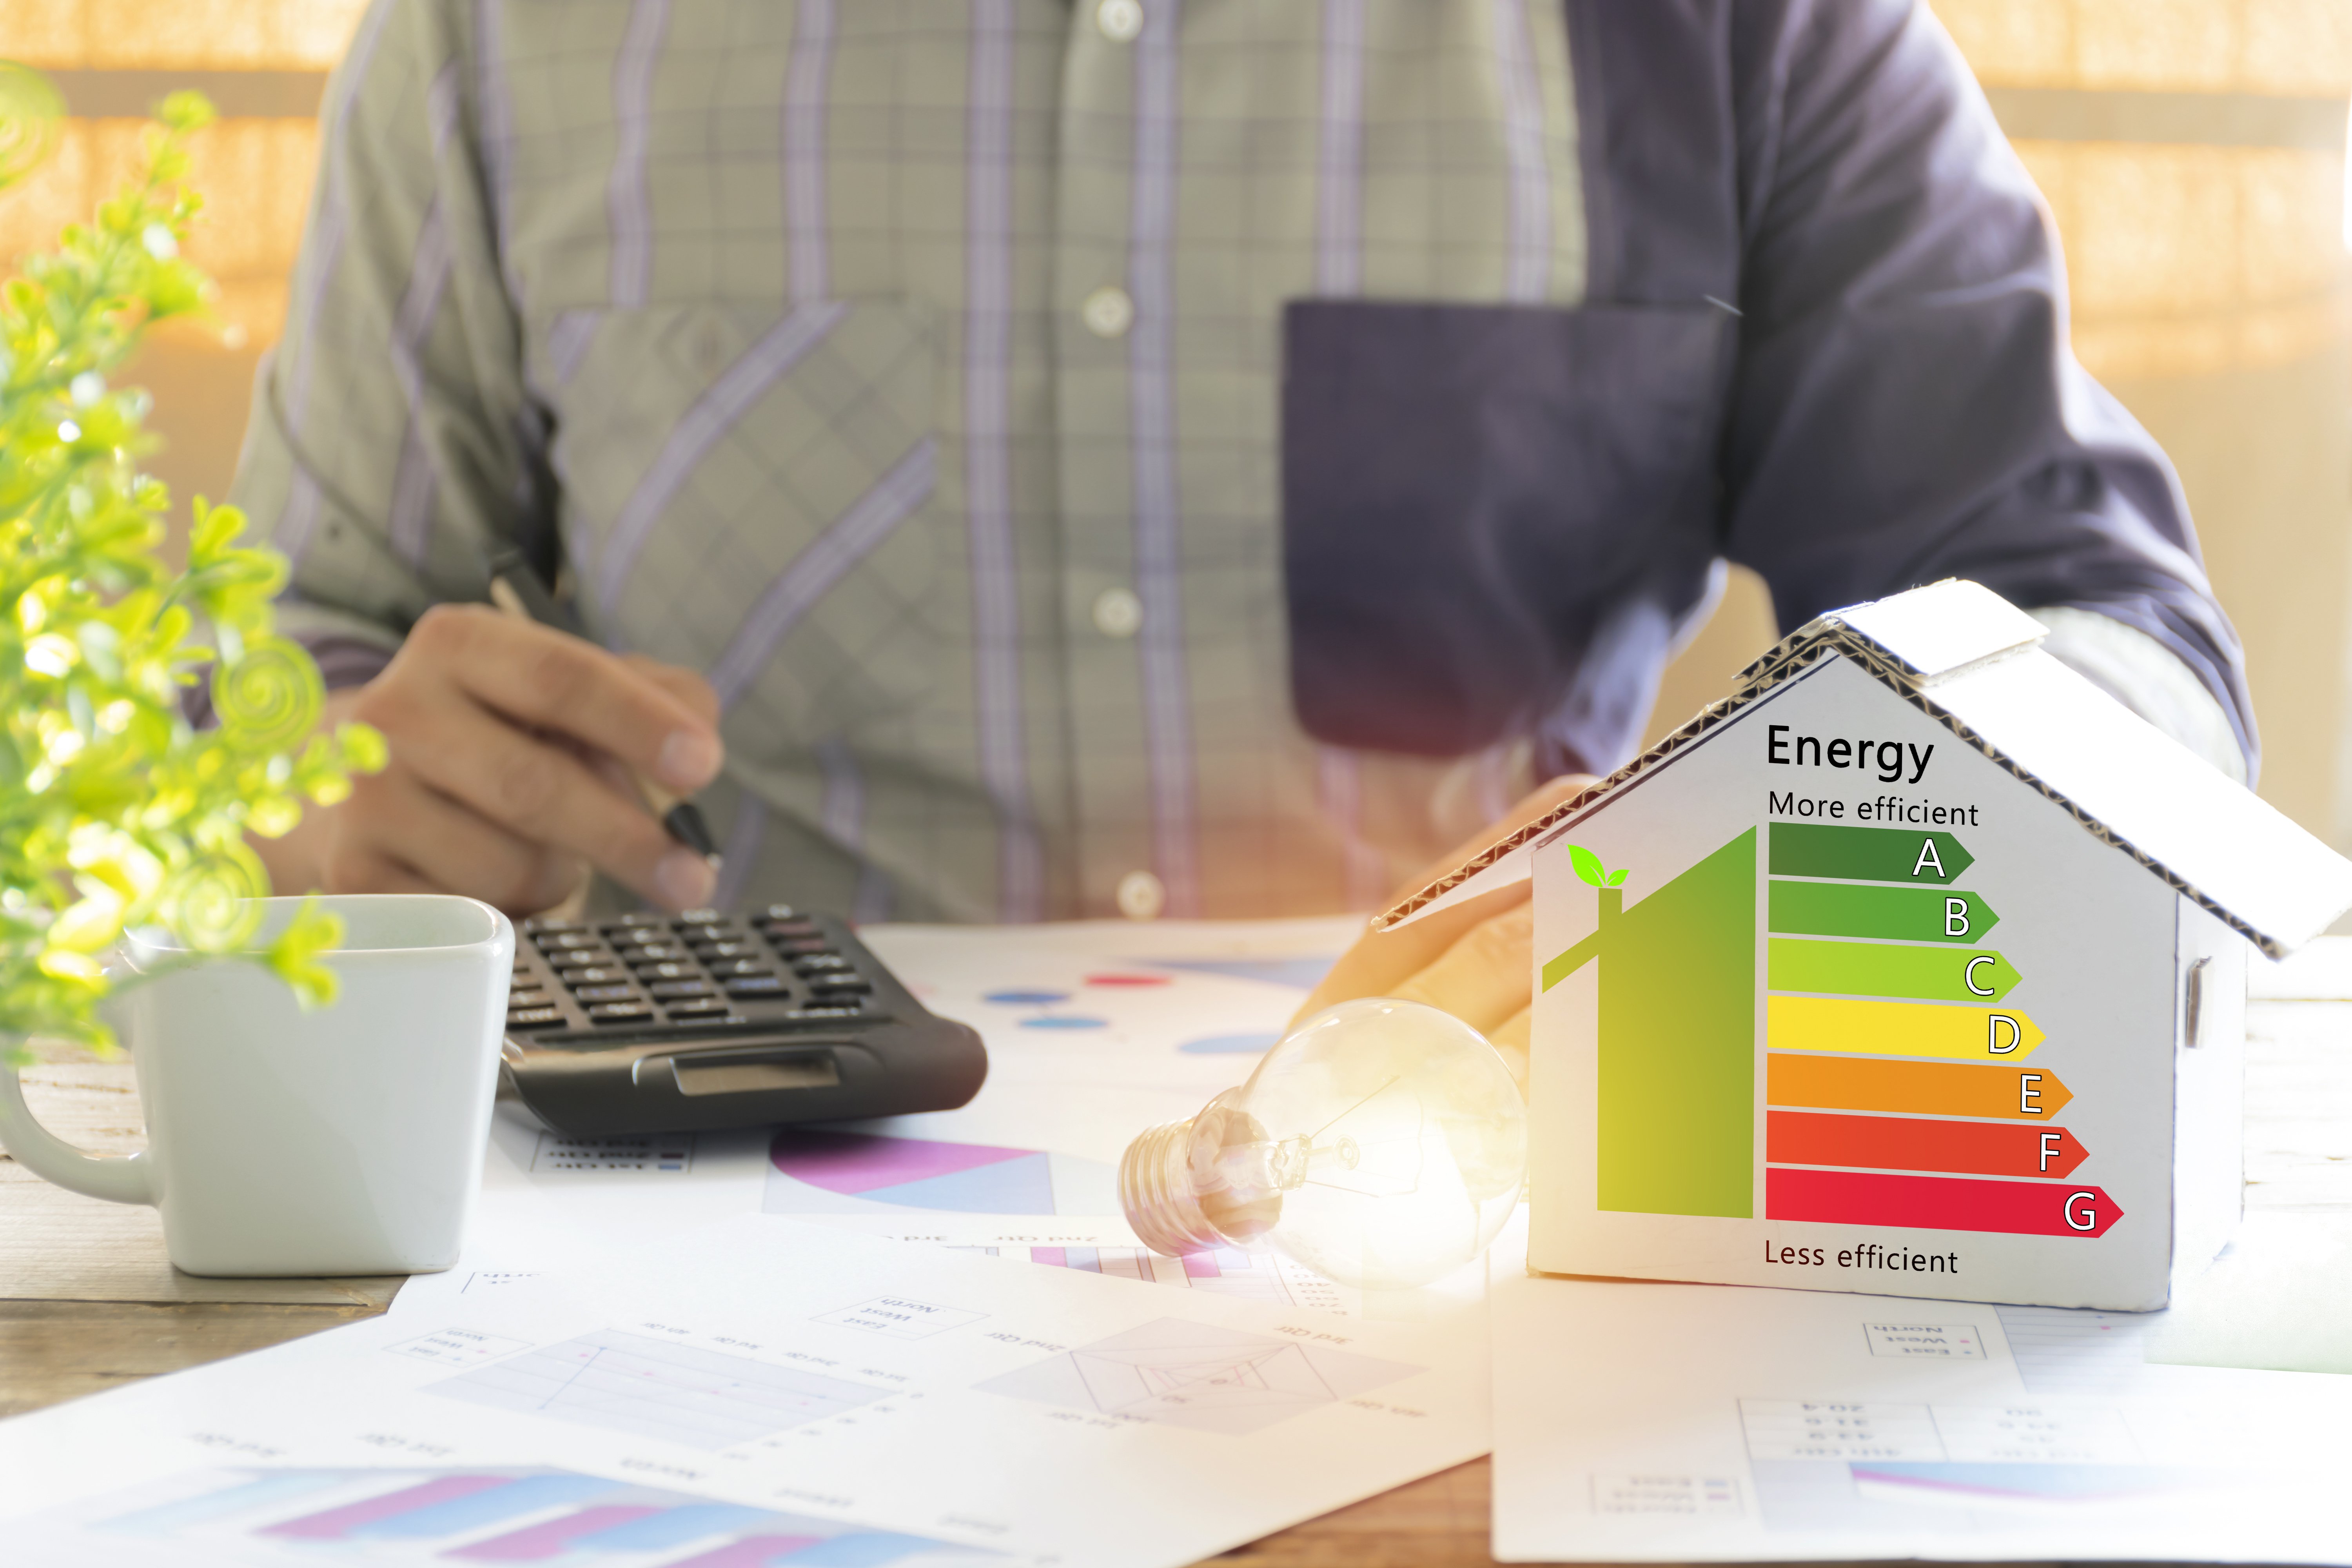 Home Energy Audits Can Help Save You Money